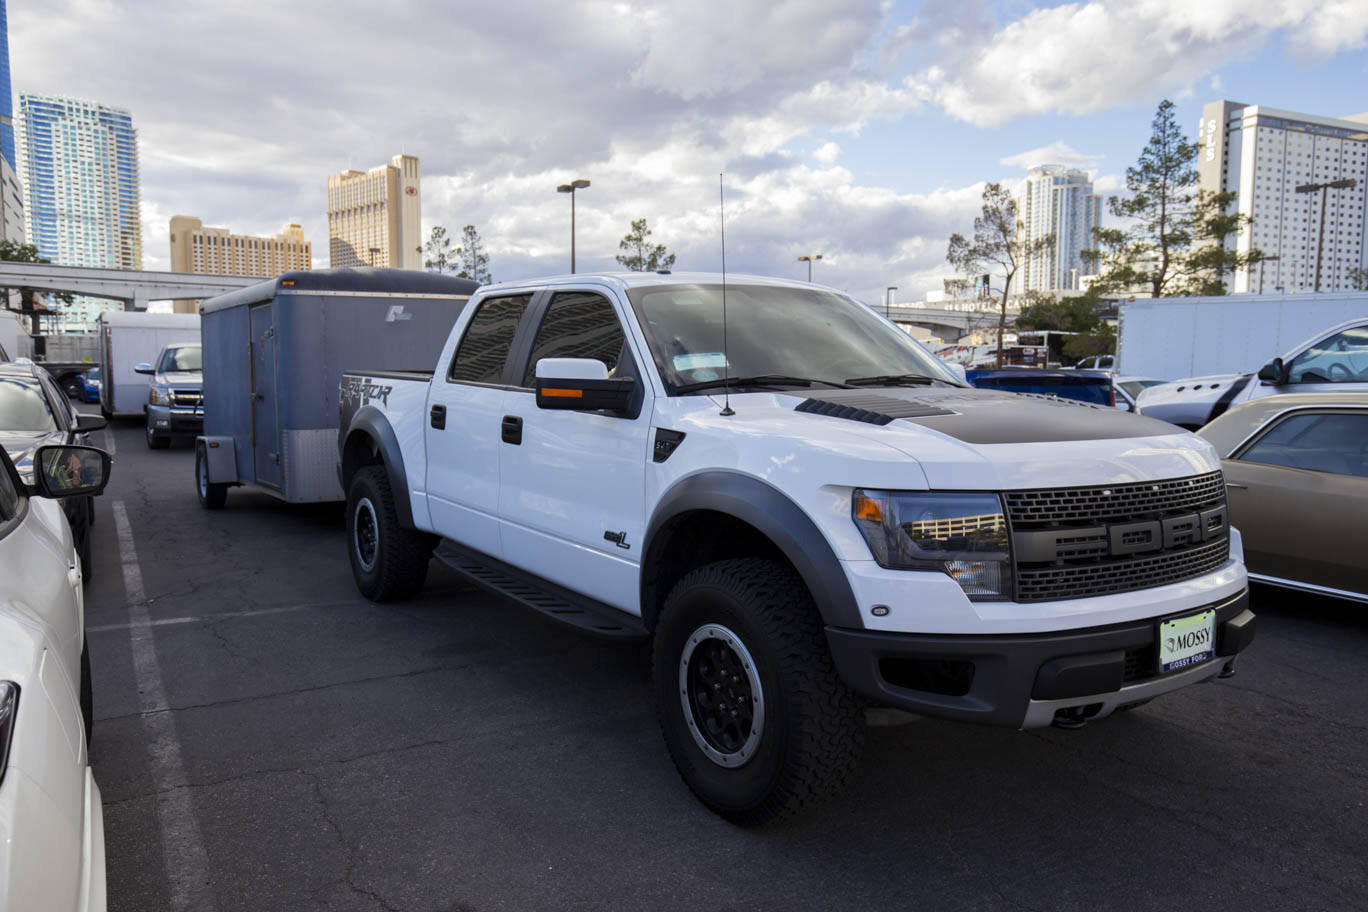 Raptor with trailer at SEMA